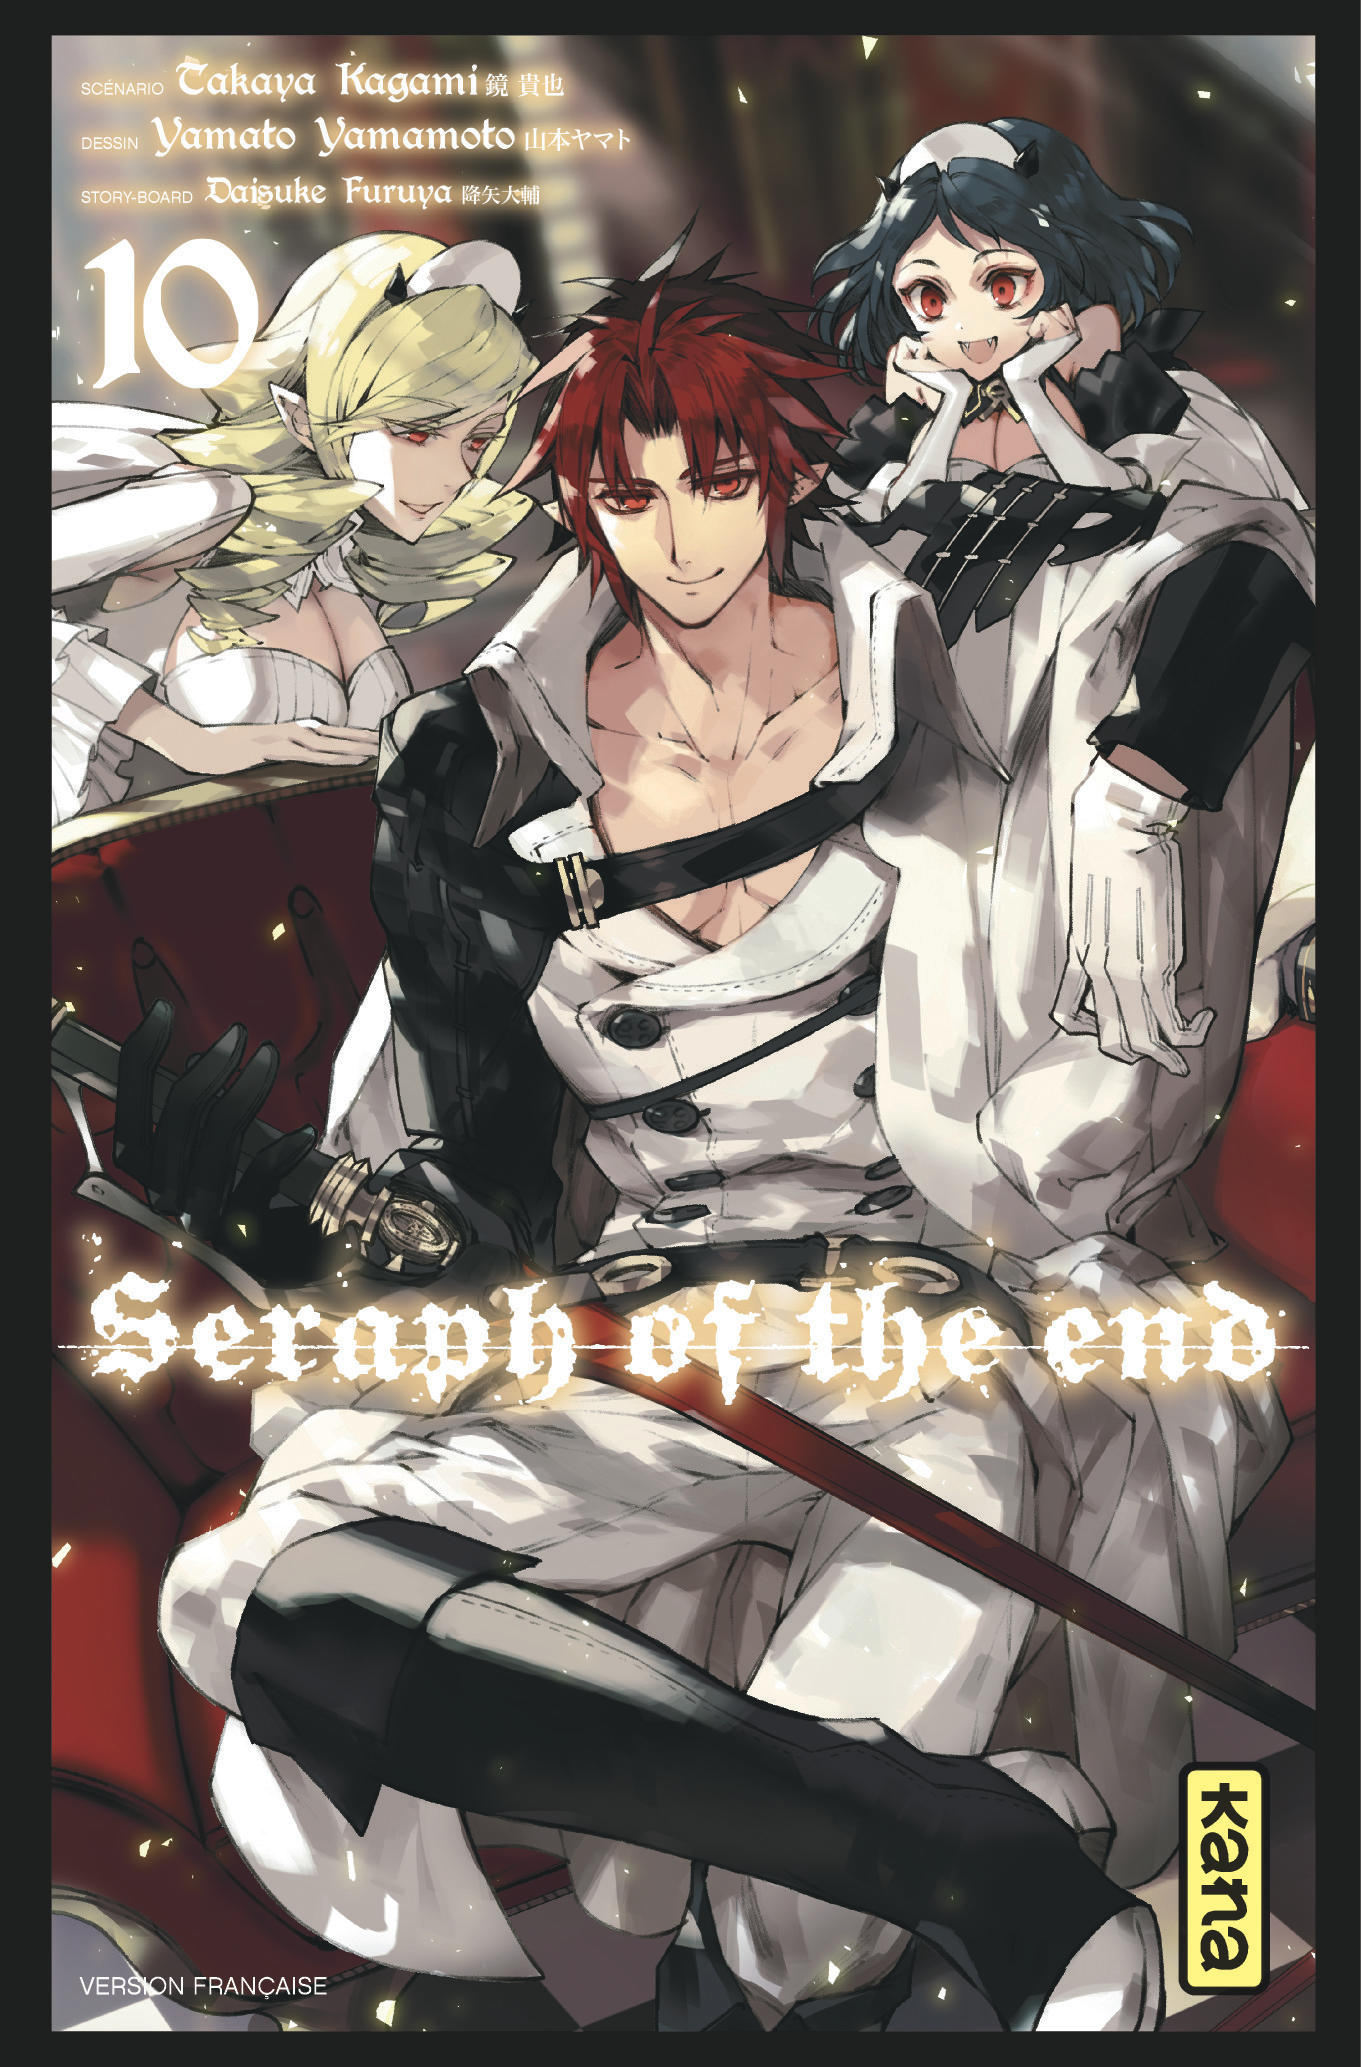 Seraph of the end – Tome 10 - couv